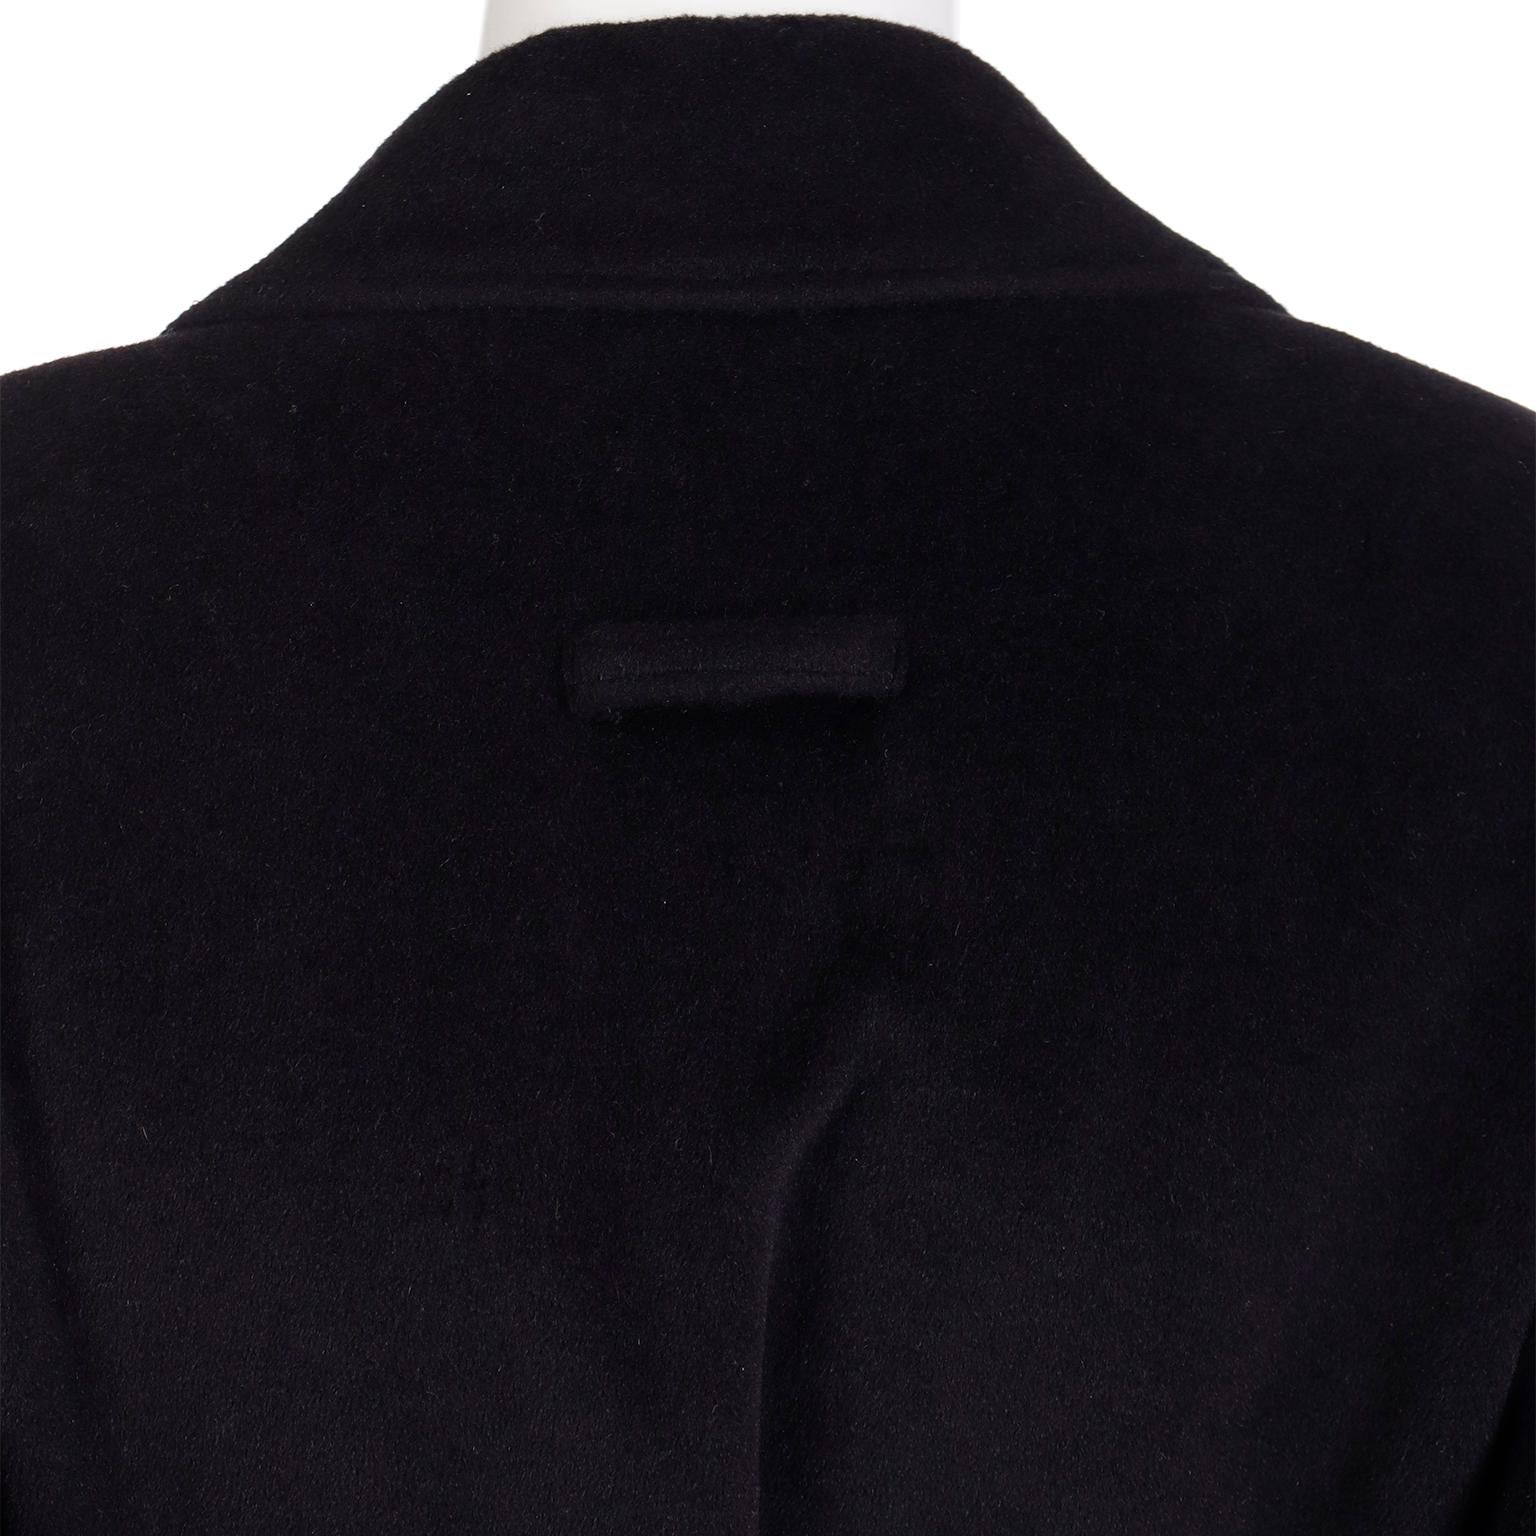 F/W 2000 Jean Paul Gaultier Black Angora Wool Coat with Belt & Signature LIning For Sale 4